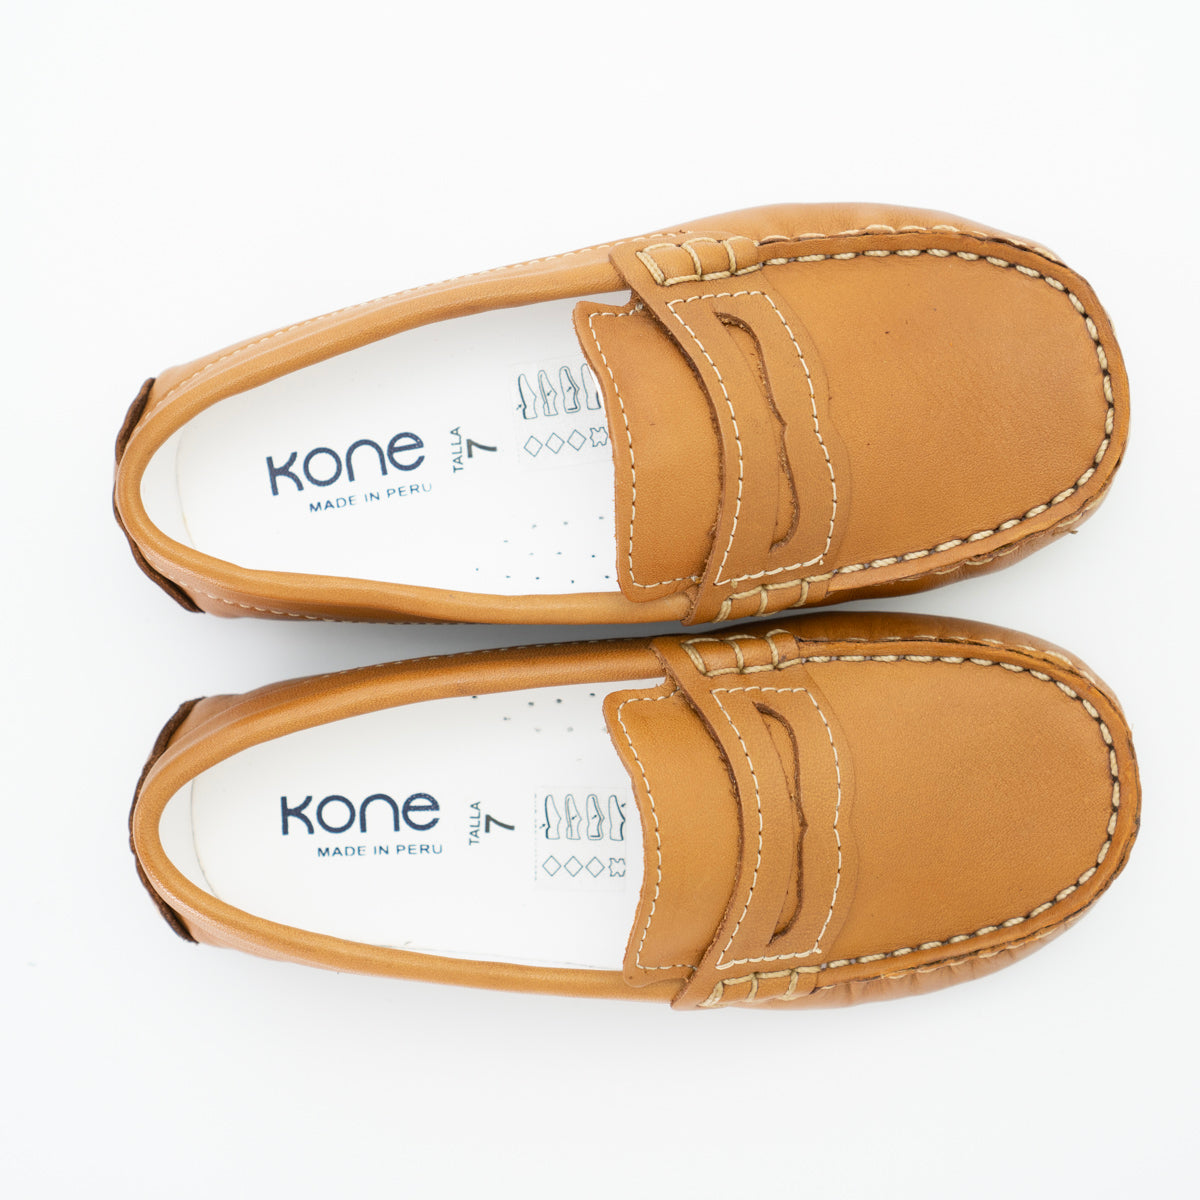 Kone boys’ leather loafers offer the ultimate combination of style, elegance, and comfort. The classic modeling intersects with the highest quality materials and expert craftsmanship. Whether you dress them up or dress them down, your little prince will shine in his Kone leather loafers!  Leather upper Slip-on penny loafer design for quick and easy on and off Breathable lining and a cushioned insole Driver style sole Made in Peru